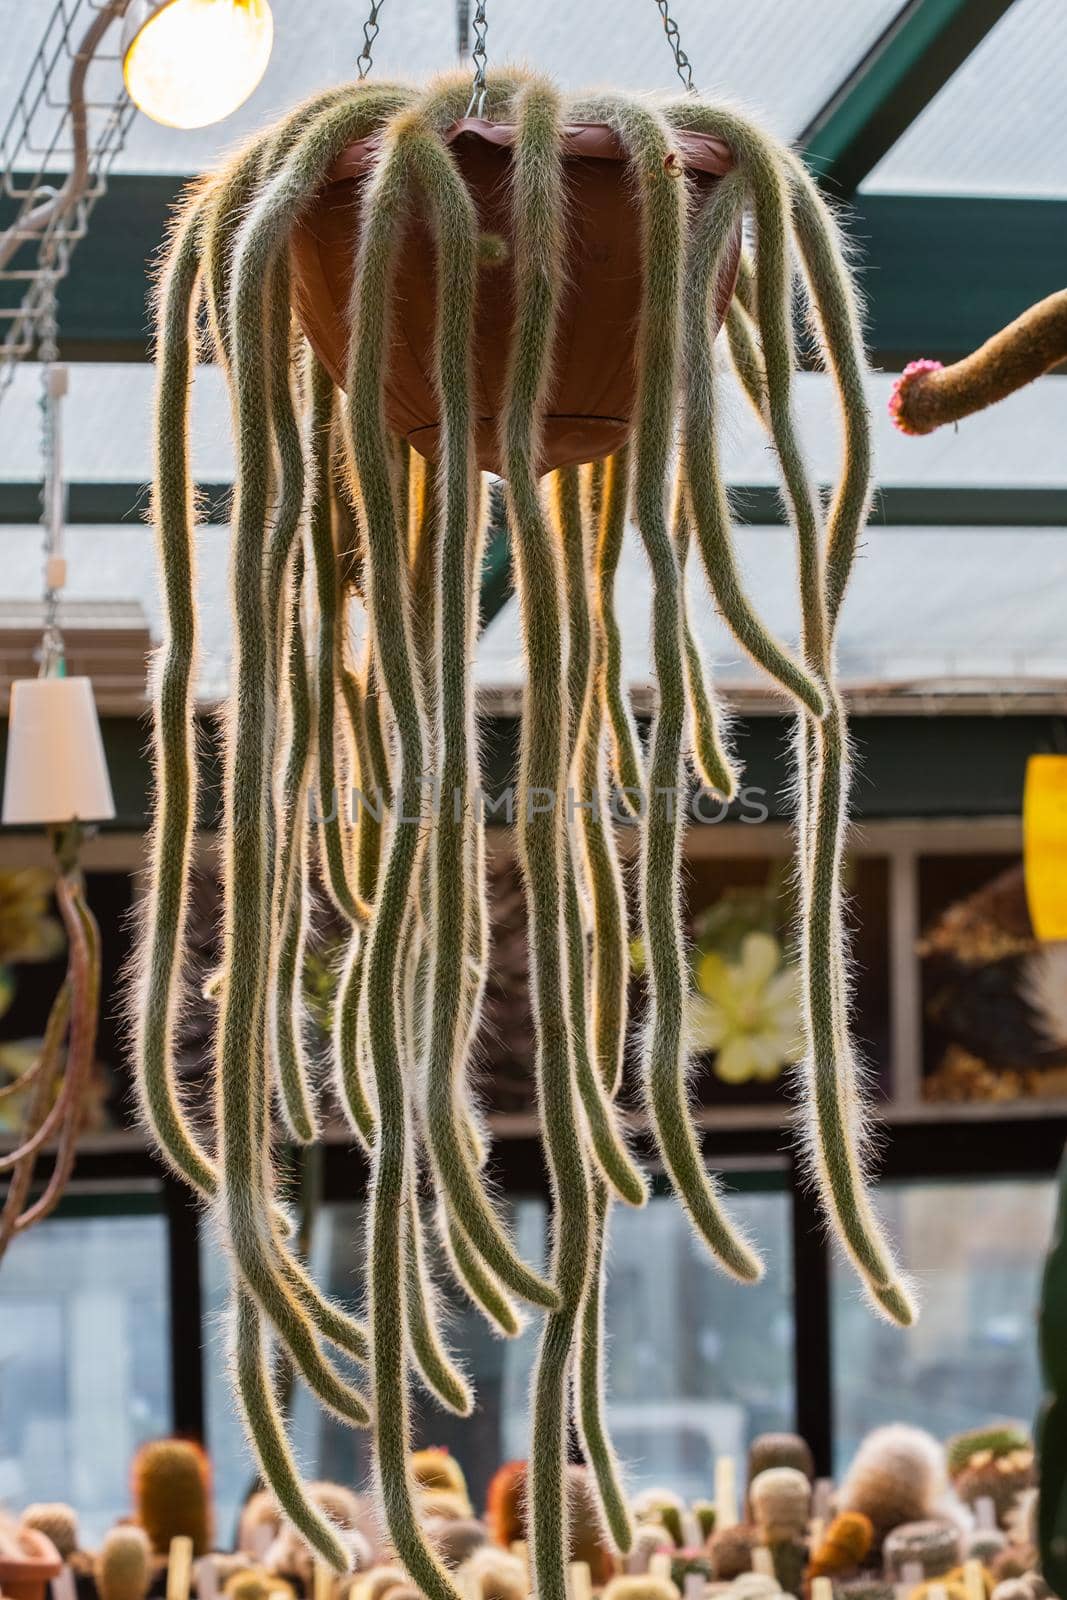 A bizarre tropical cactus descends from a hanging pot in a greenhouse.